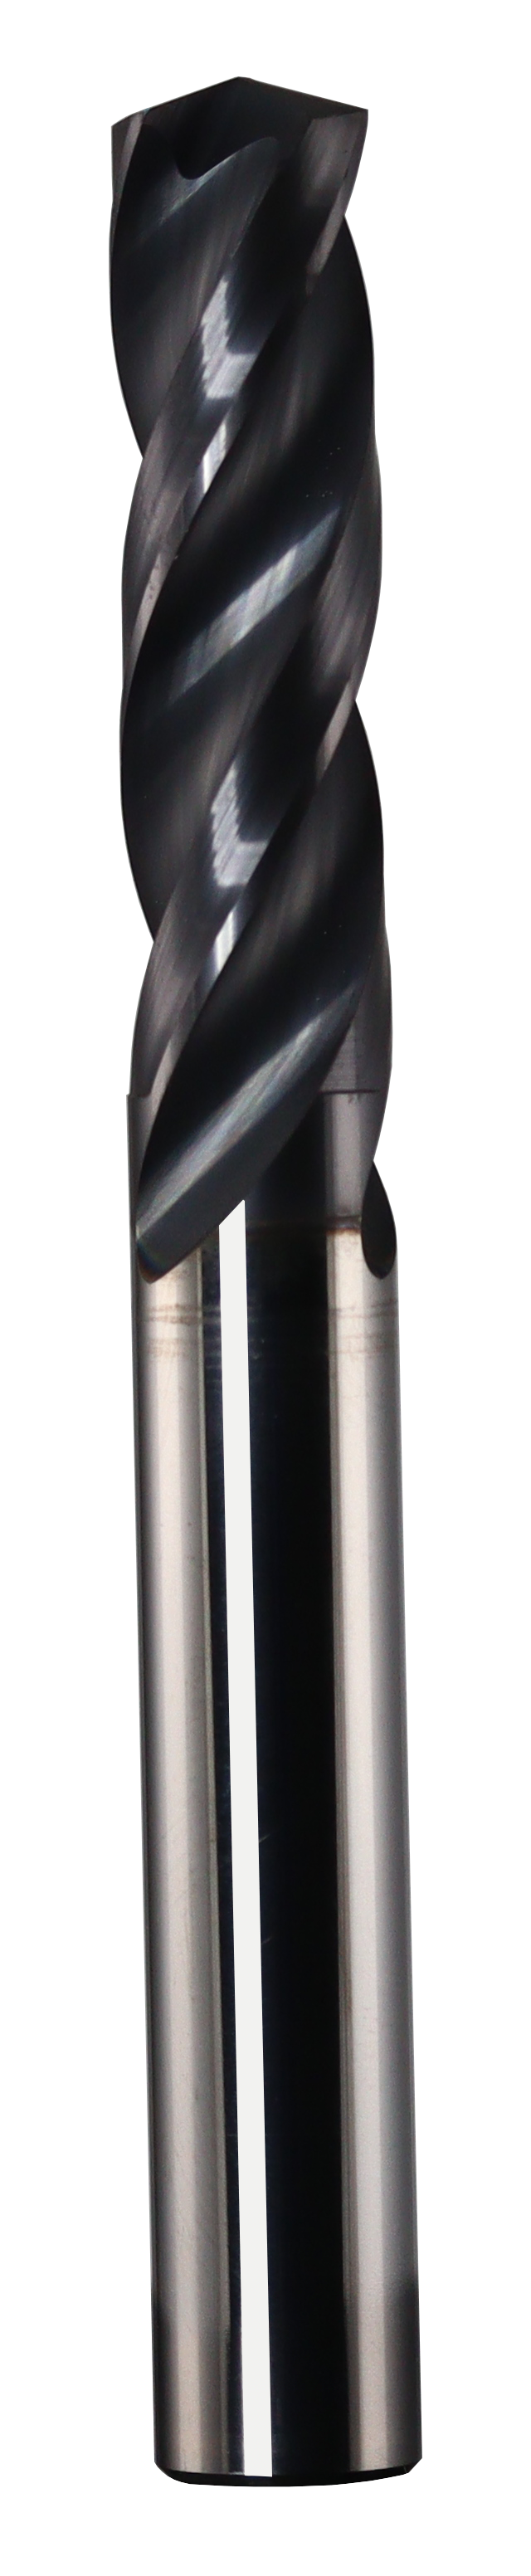 10.20mm Dia, 150 Degree Point, Solid Carbide Drill - 69037